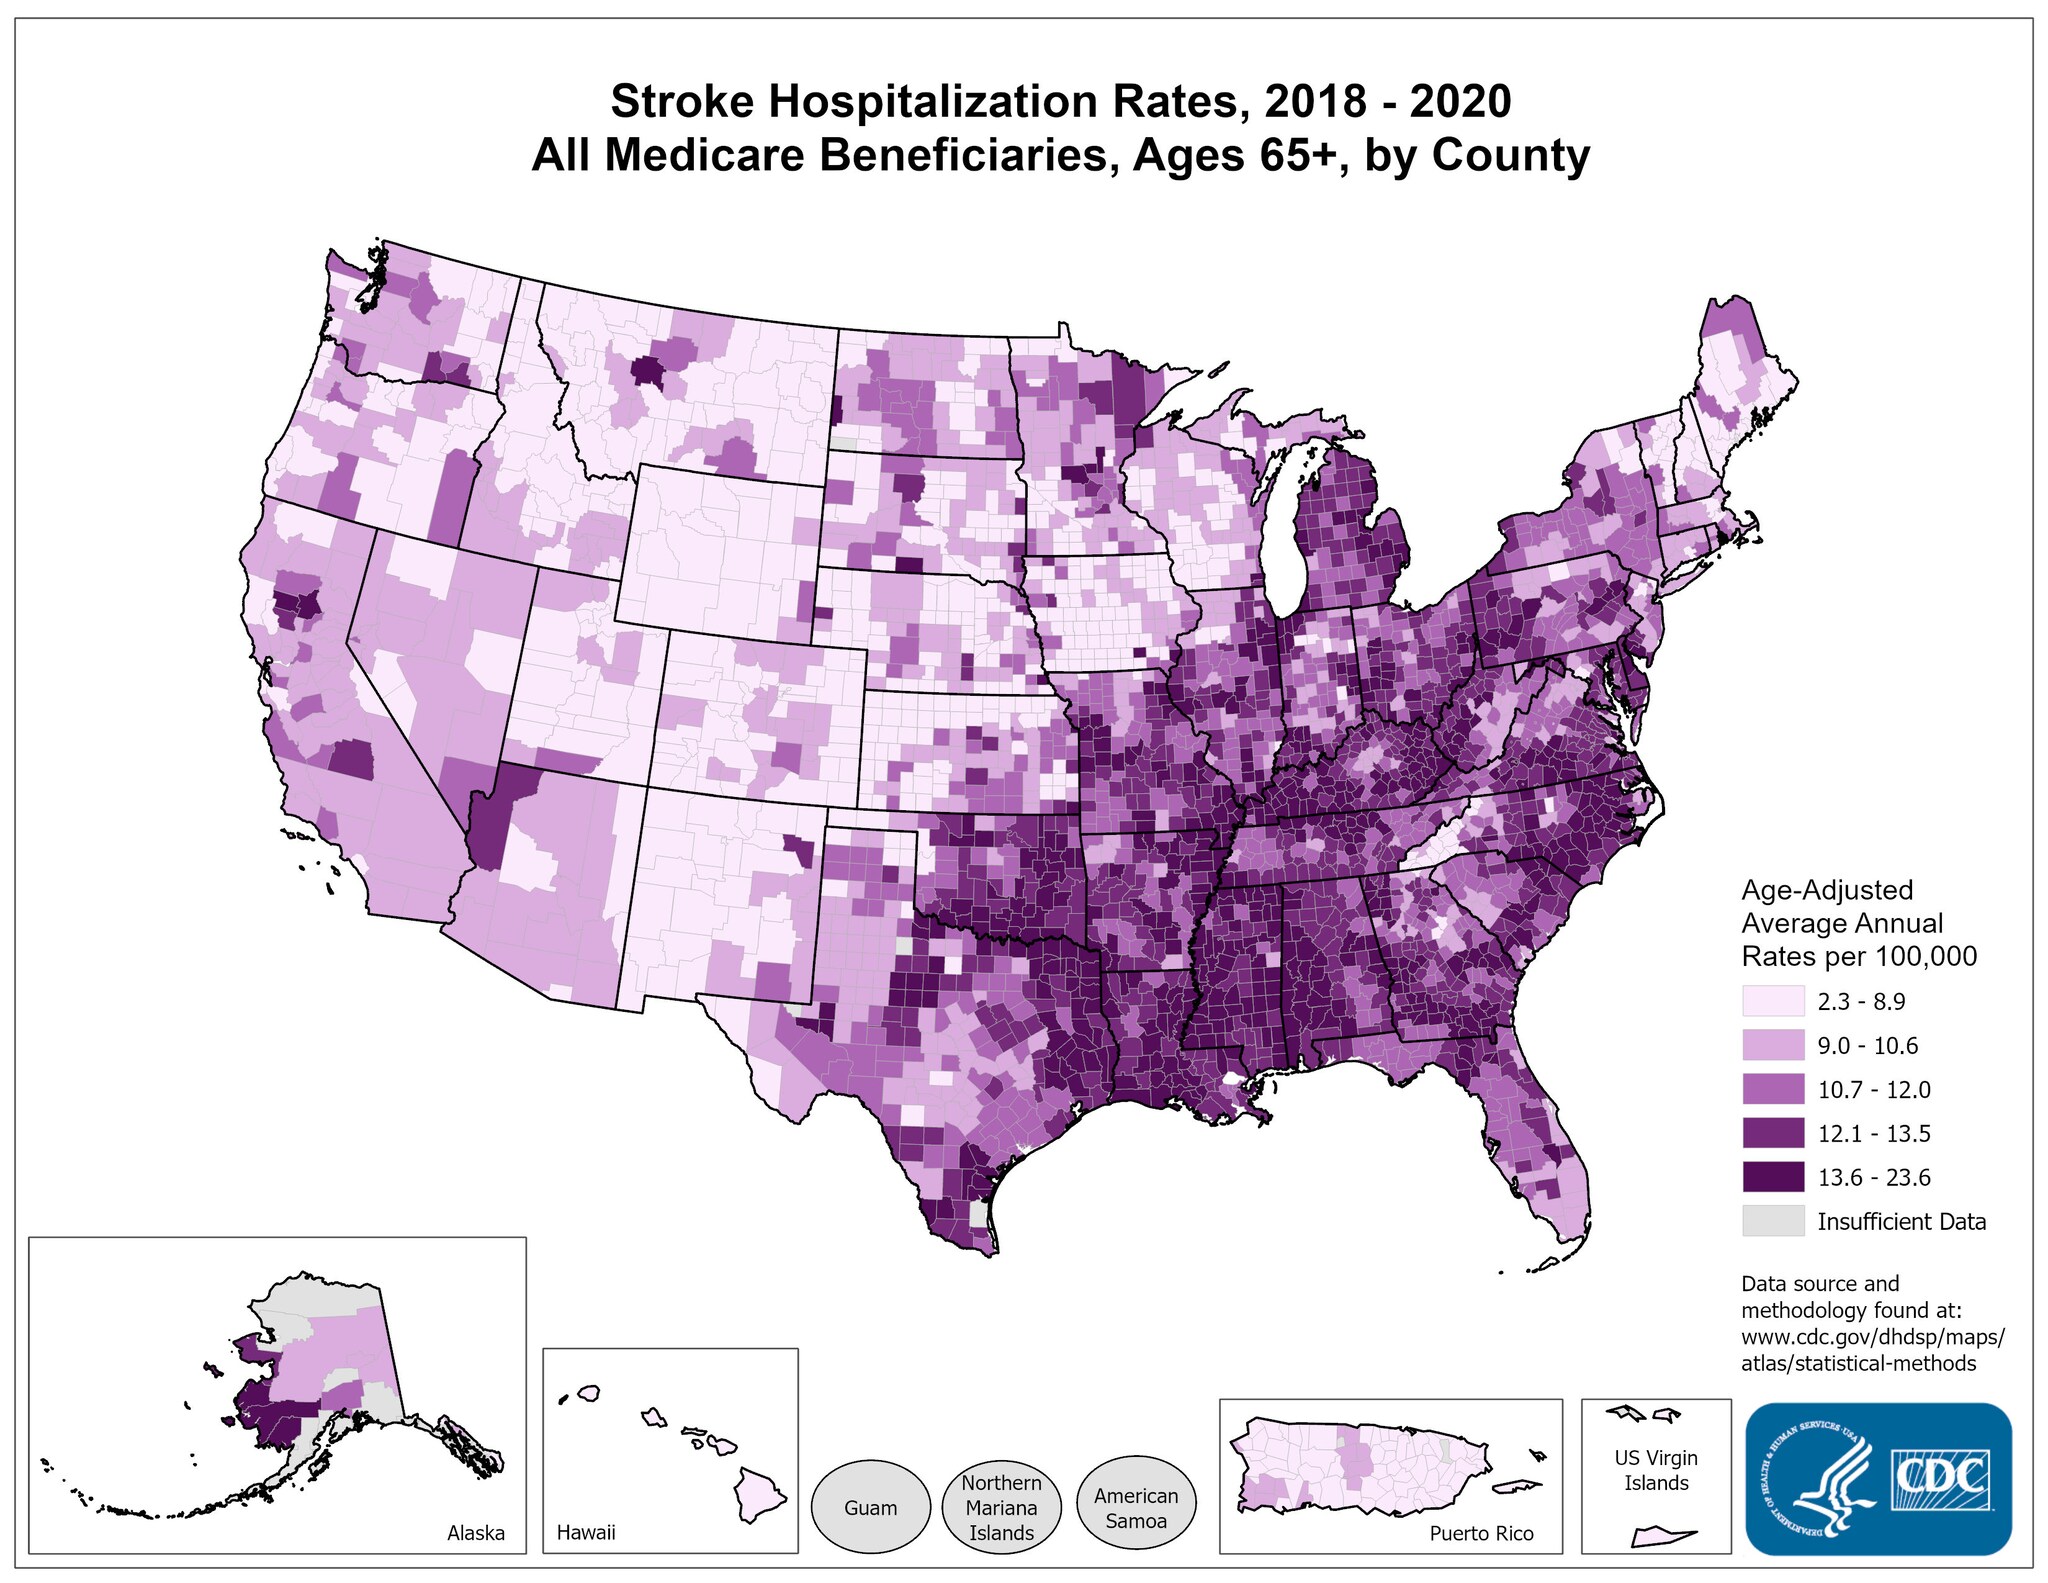 Stroke Hospitalization Rates for 2015 through 2017 for Adults Aged 65 Years and Older by County. The map shows that concentrations of counties with the highest stroke hospitalization rates - meaning the top quintile - are located primarily in the Southeast, with heavy concentrations of high-rate counties in Alabama, Mississippi, Louisiana and North Carolina. Pockets of high-rate counties also are found in West Virginia, Kentucky, Tennessee, Arkansas, Oklahoma, Virginia, Texas, Alaska, Missouri, Michigan, South Carolina, Georgia, Delaware and Maryland.